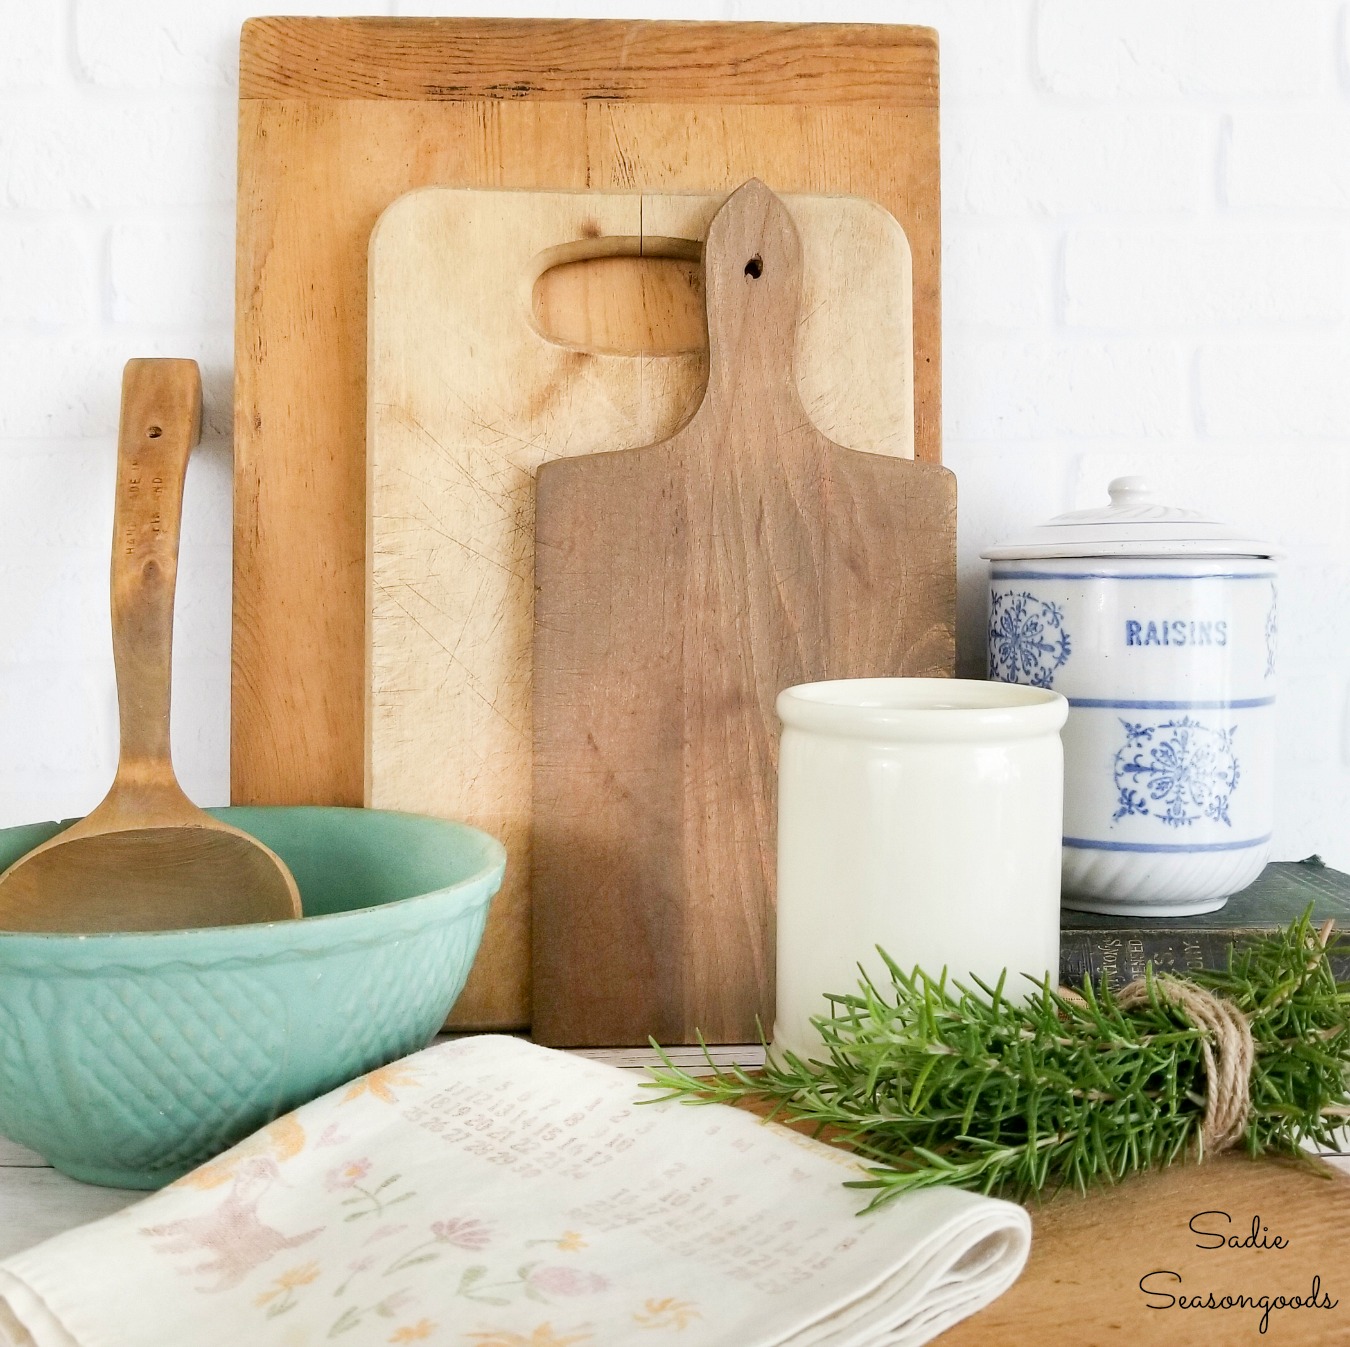 50+ Gorgeous French Decor Items at Overstock. French decor for less!